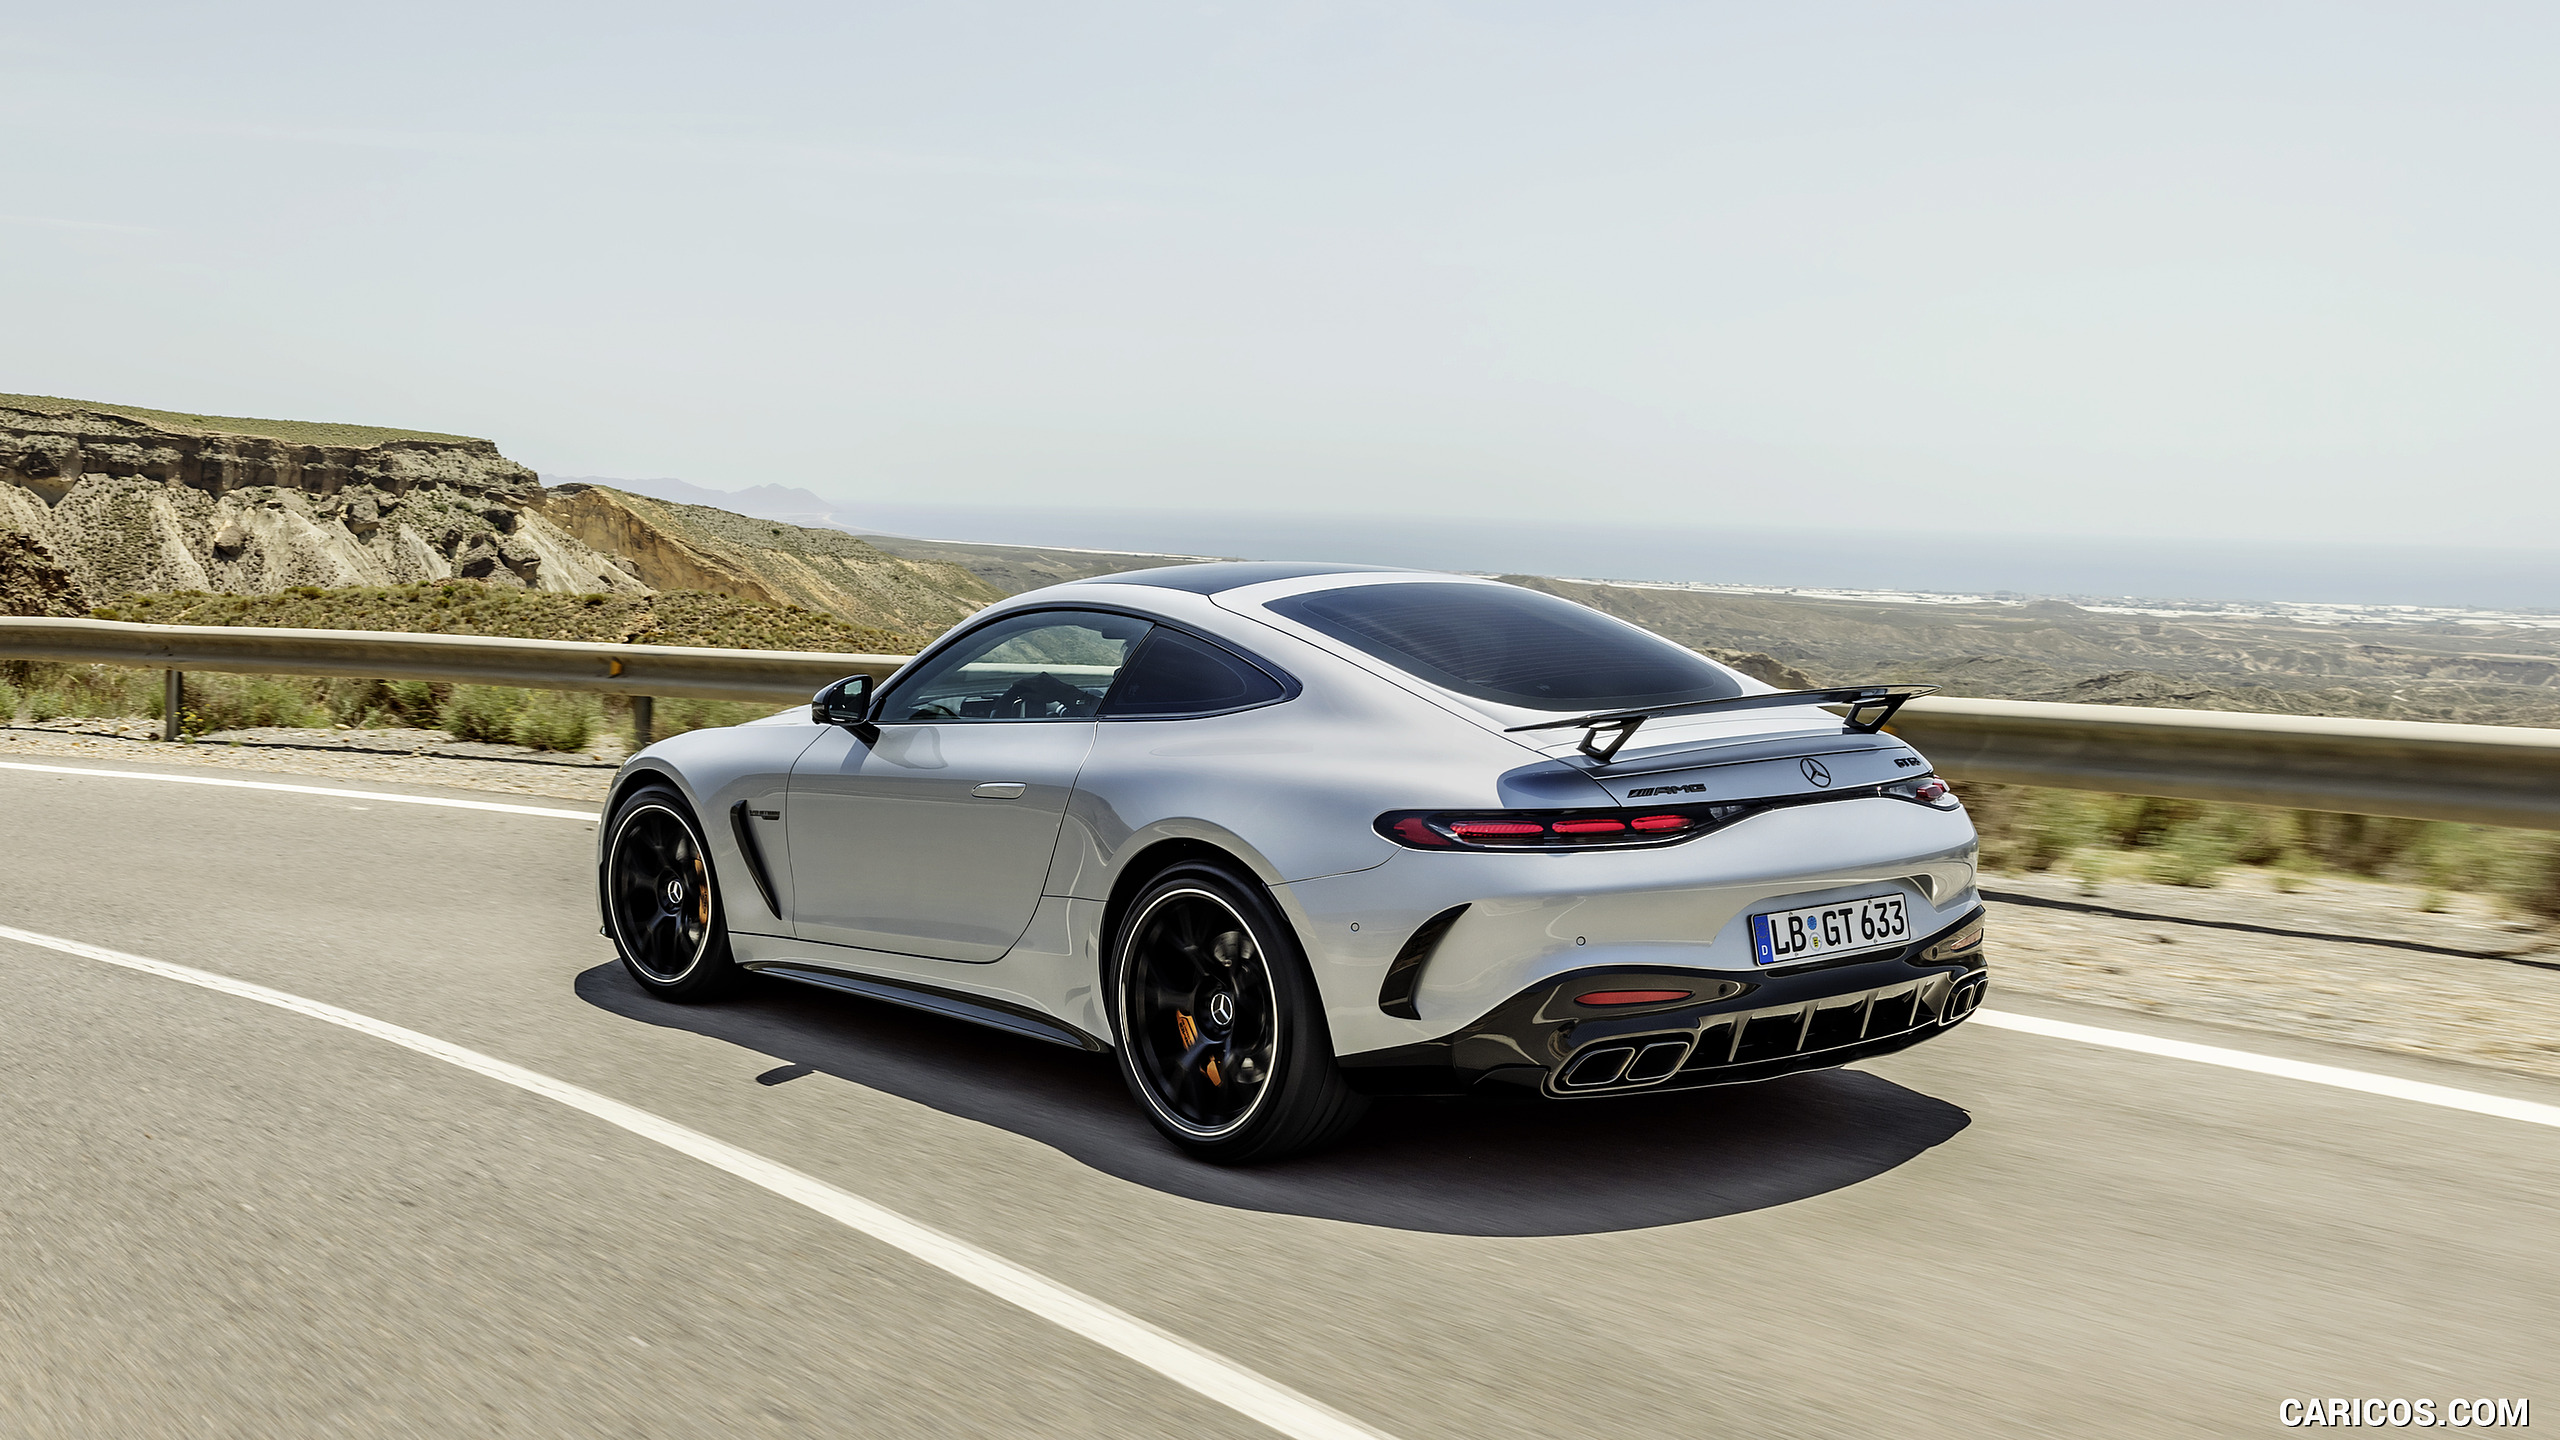 2024 Mercedes-AMG GT 63 Coupé 4MATIC+ with AMG Aerodynamic package (Color: High-Tech Silver Metallic) - Rear Three-Quarter, #5 of 241